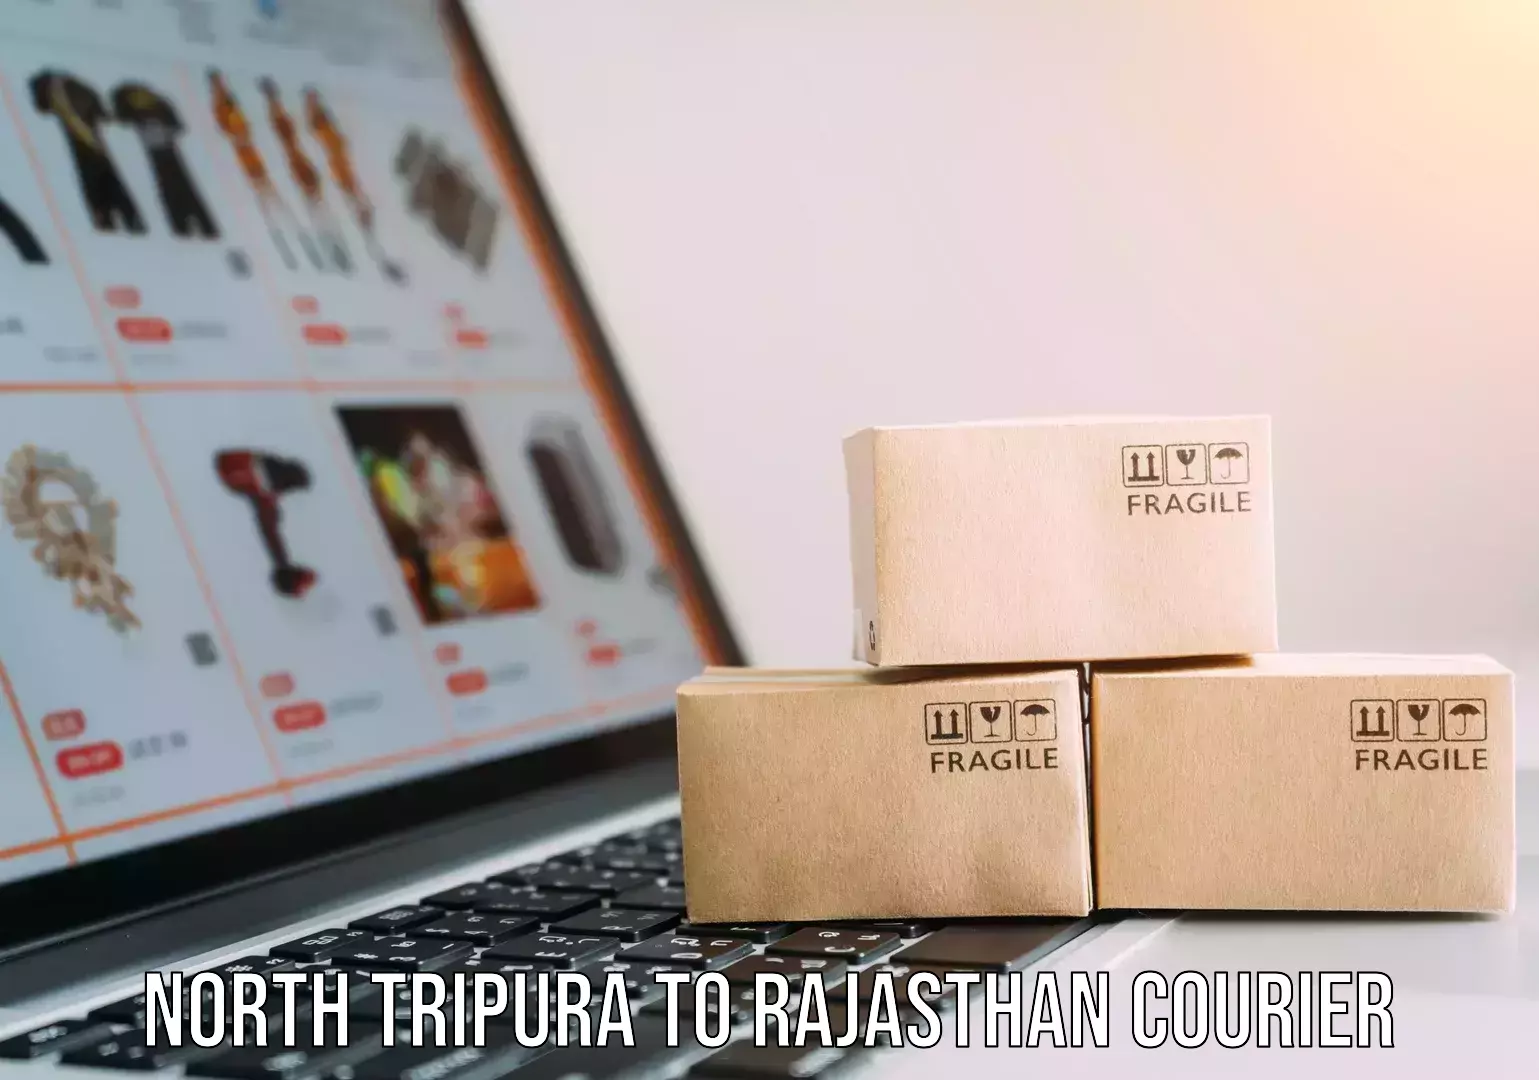 Business shipping needs North Tripura to Rajasthan